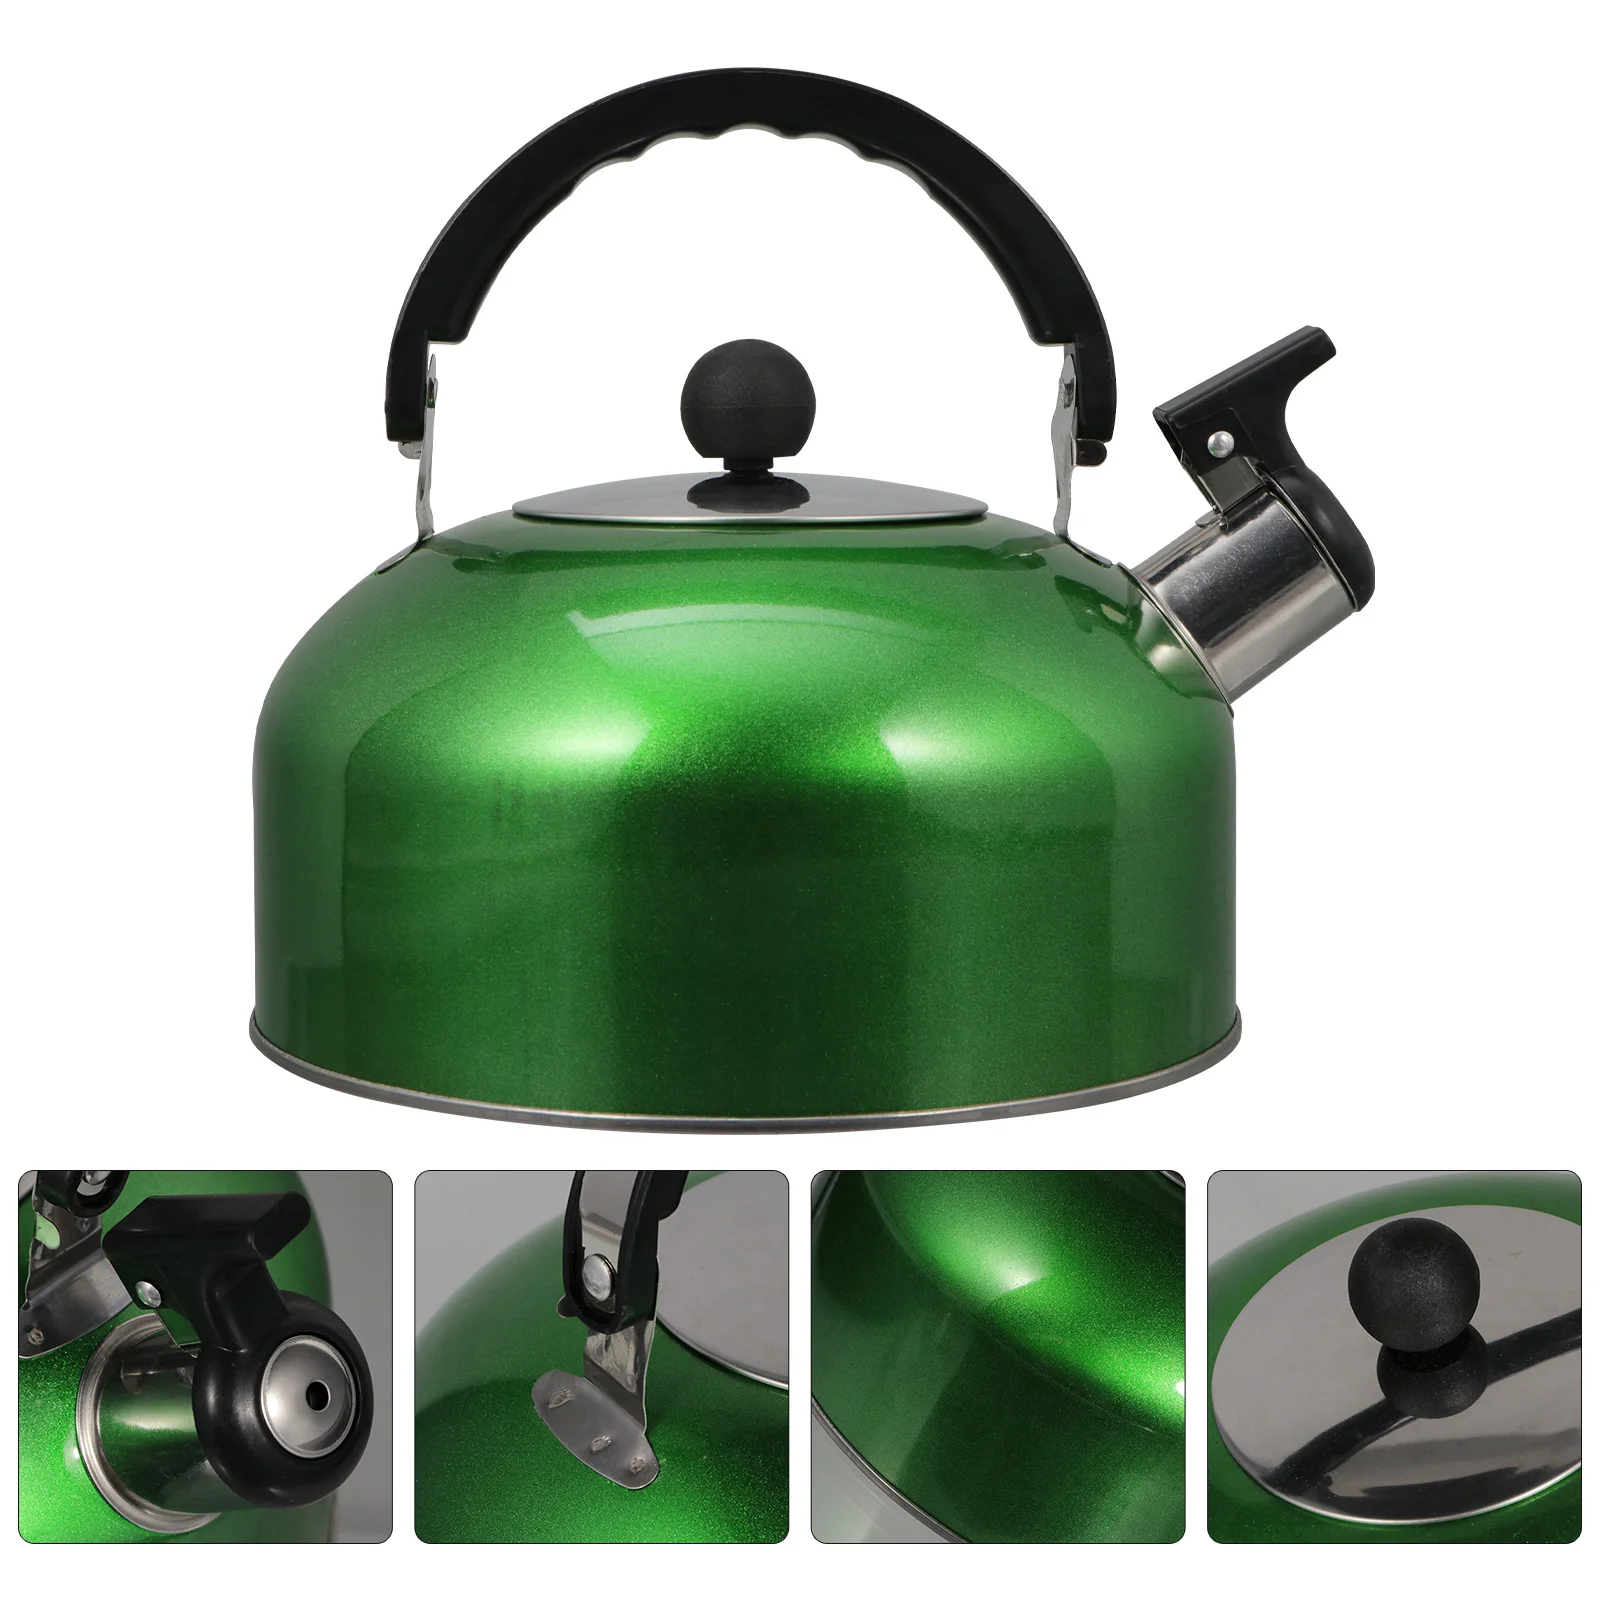 

Kettle Tea Whistling Stovetop Teapot Stove Steel Water Stainless Pot Boiling Gas Teakettle Coffee Kettles Whistle Handle Hot